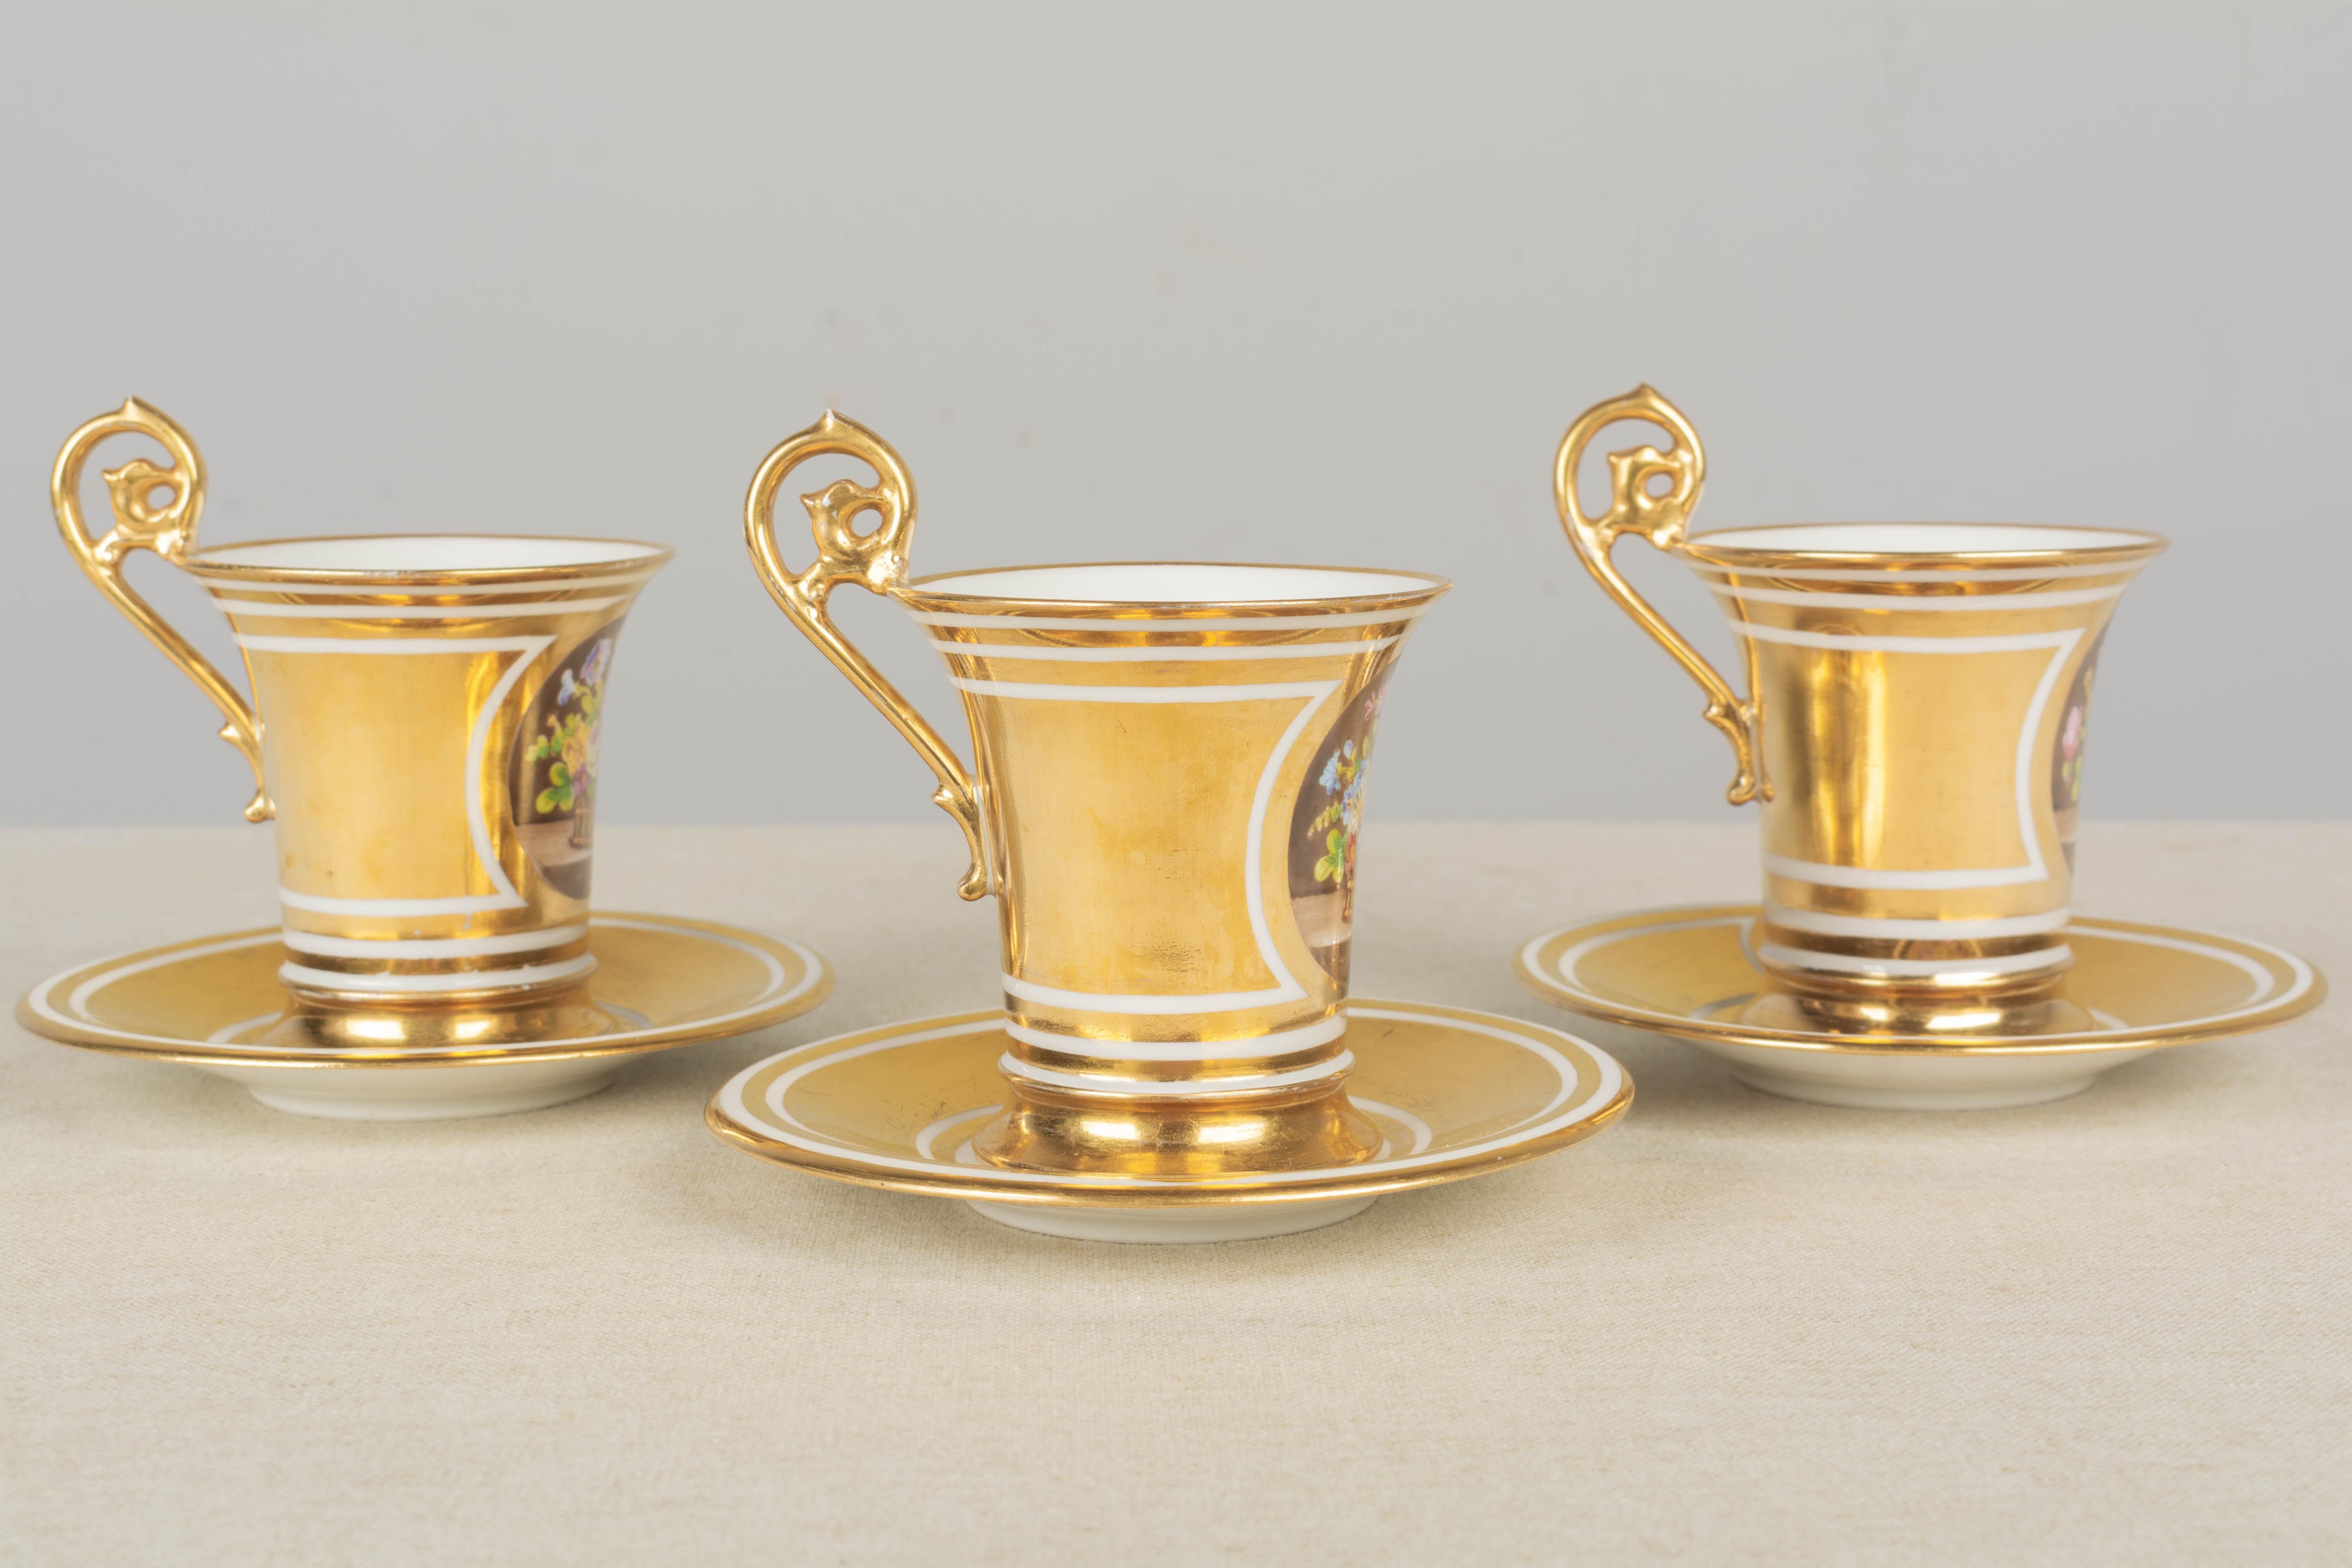 19th Century French Sèvres Gilt Porcelain Cup & Saucer, Set of 3 For Sale 1